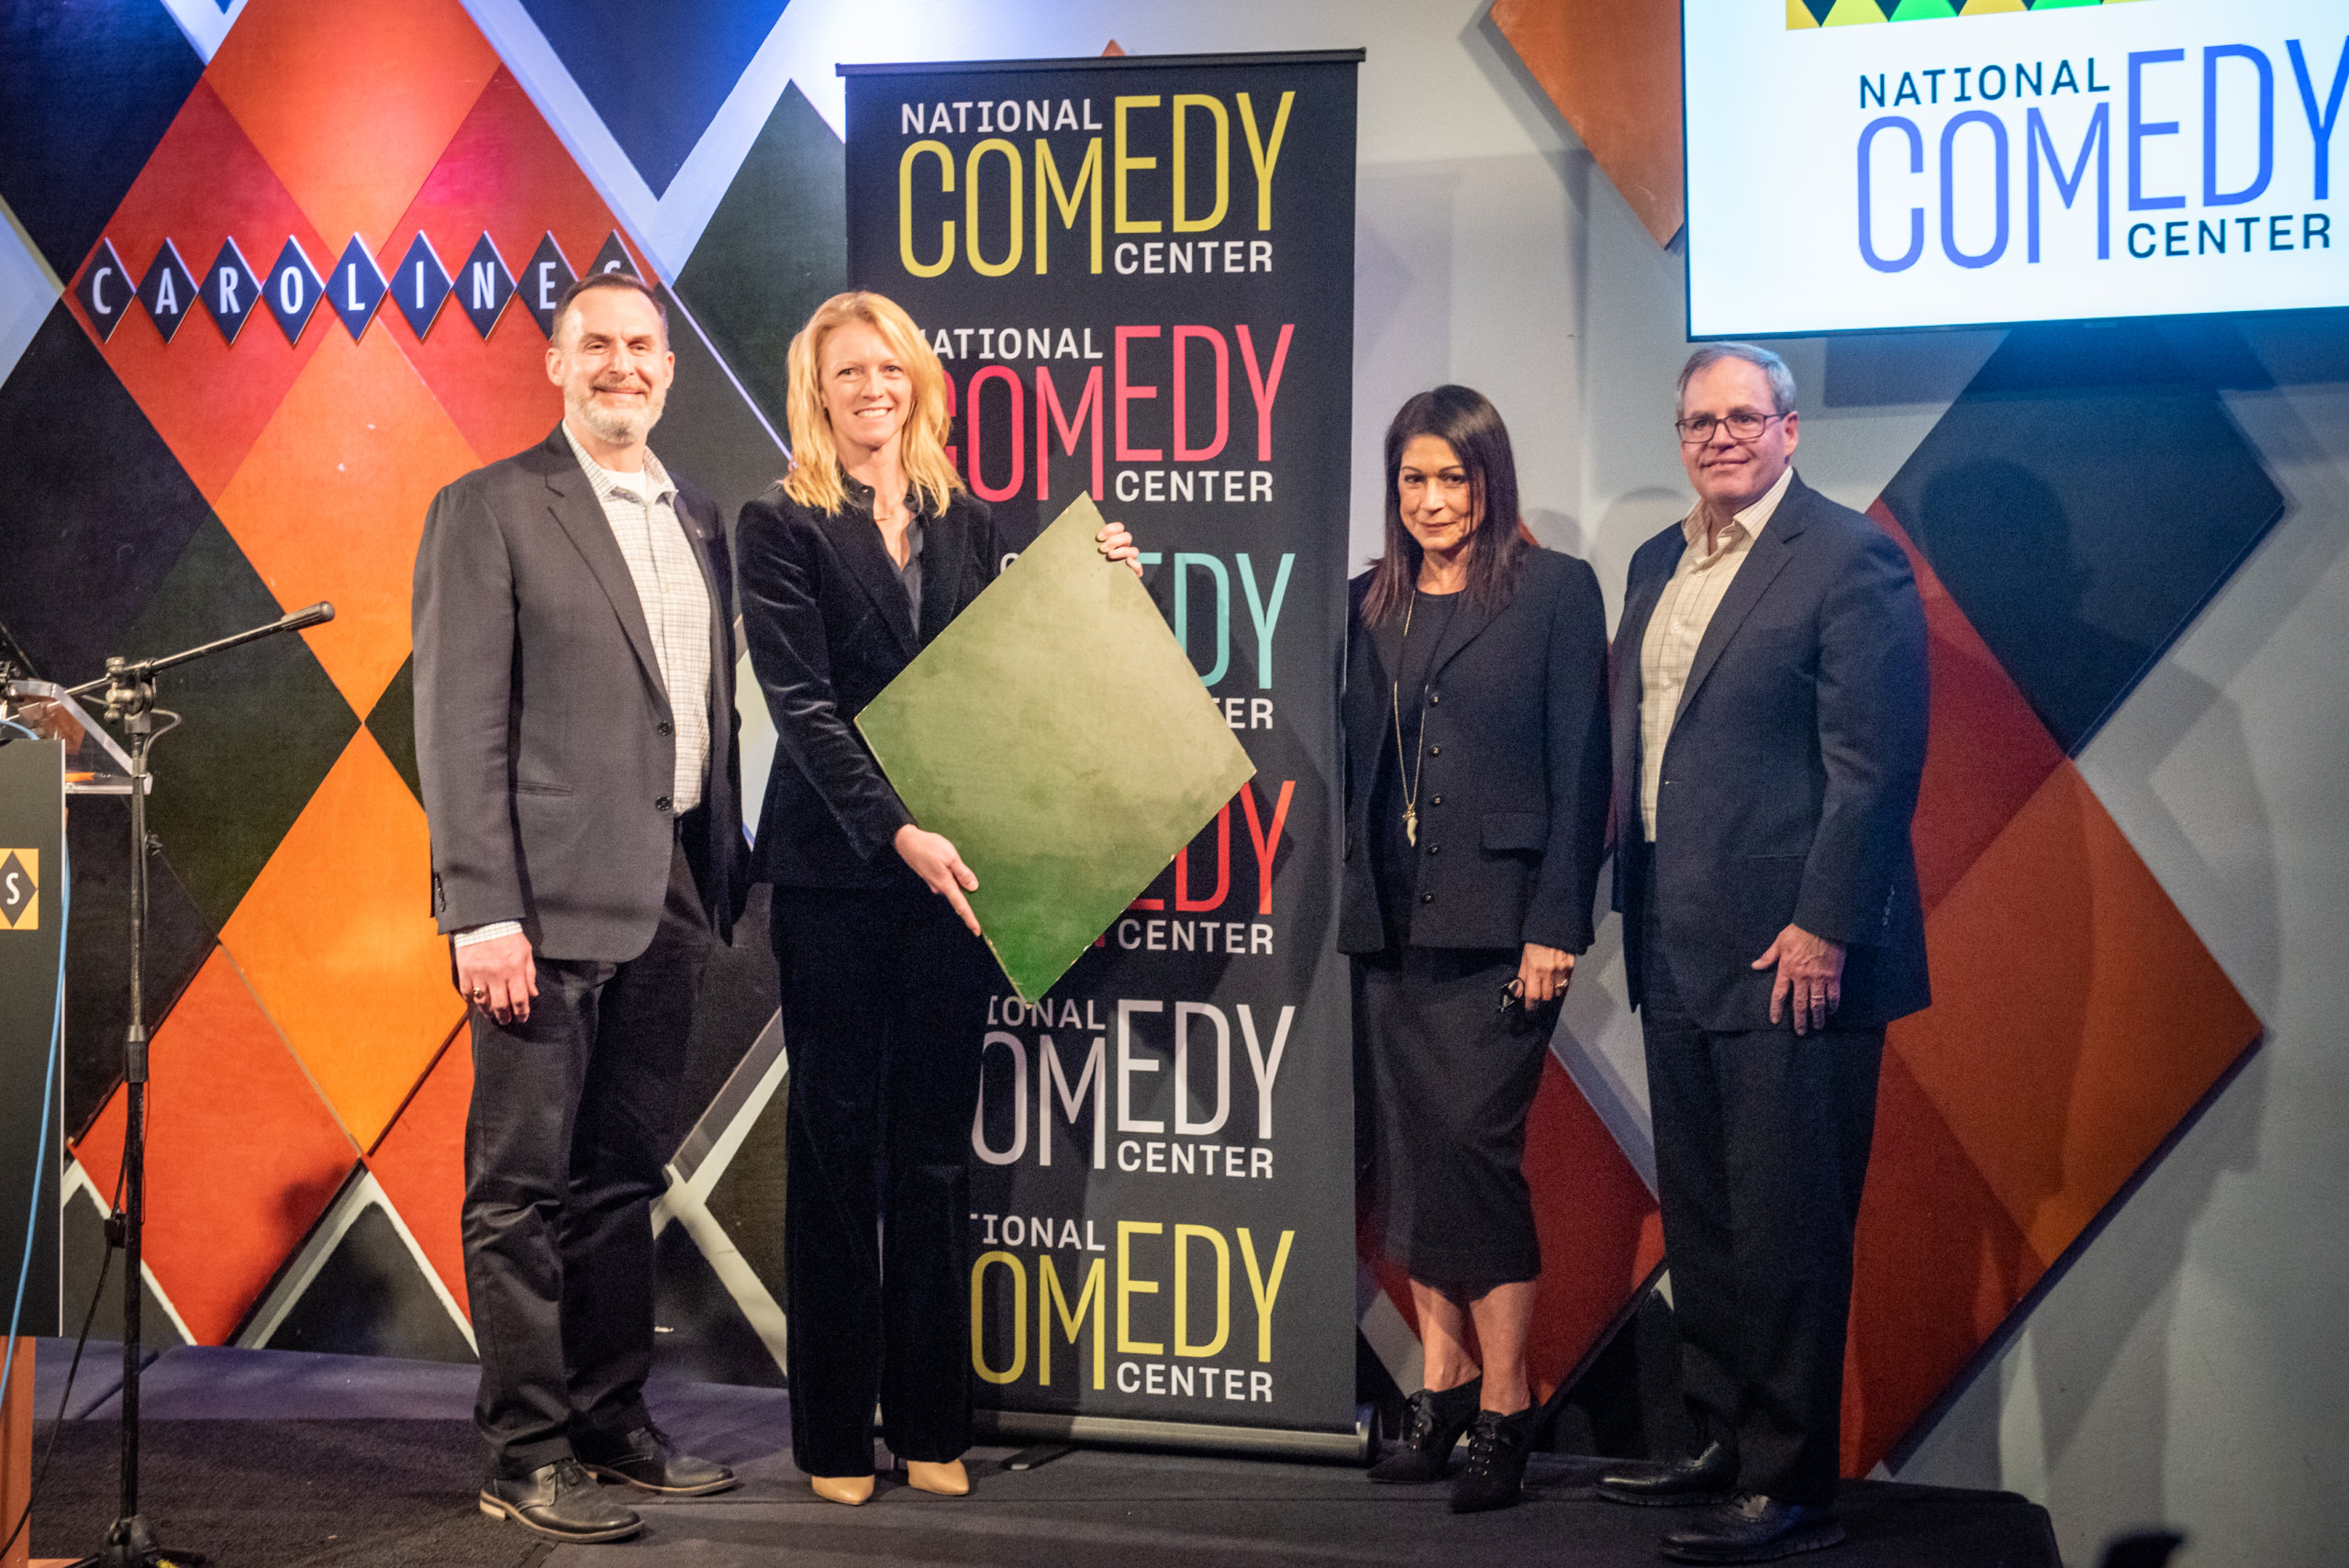 Carolines Hirsch and the National Comedy Center held a press conference at Carolines in Times Square on Thursday